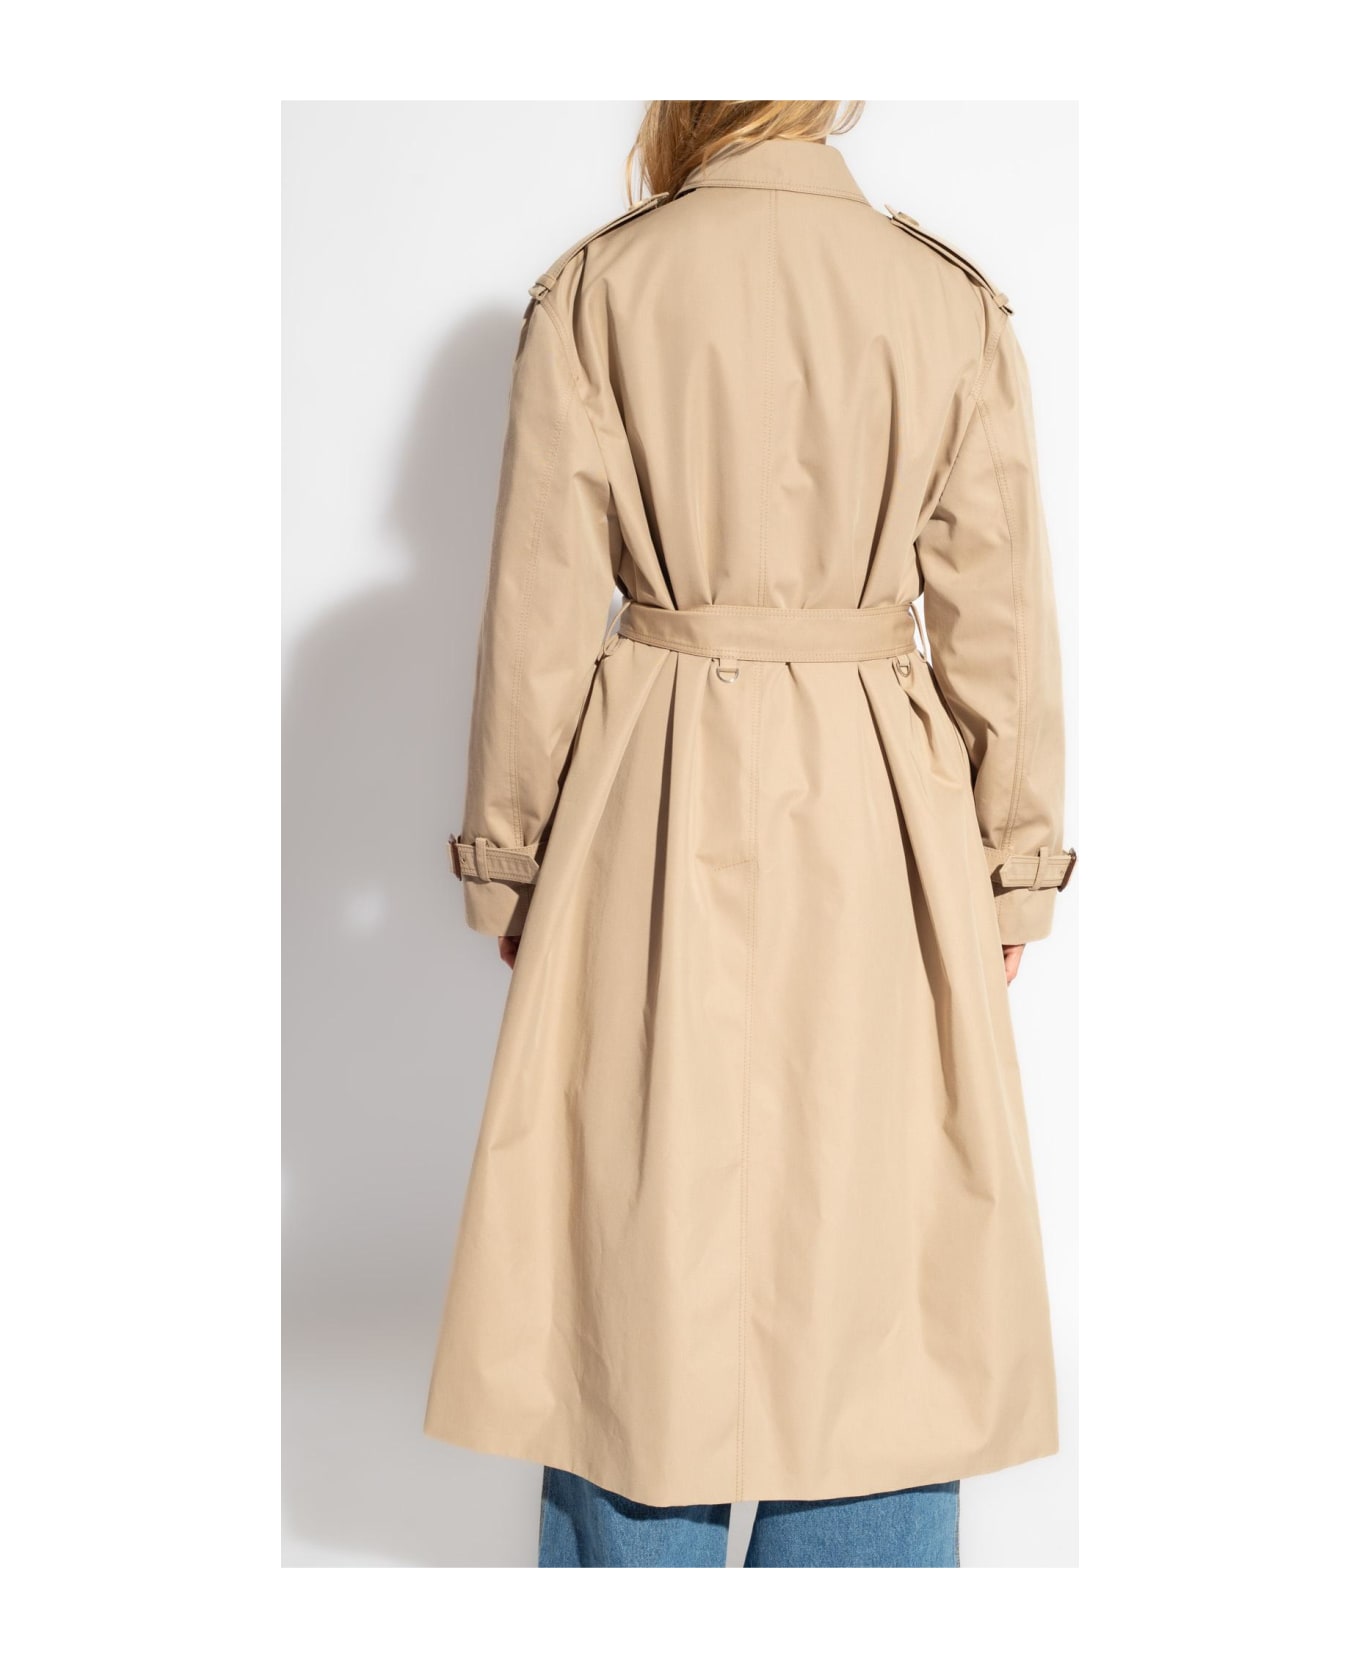 Gucci Coat With Web Stripe - Camel コート